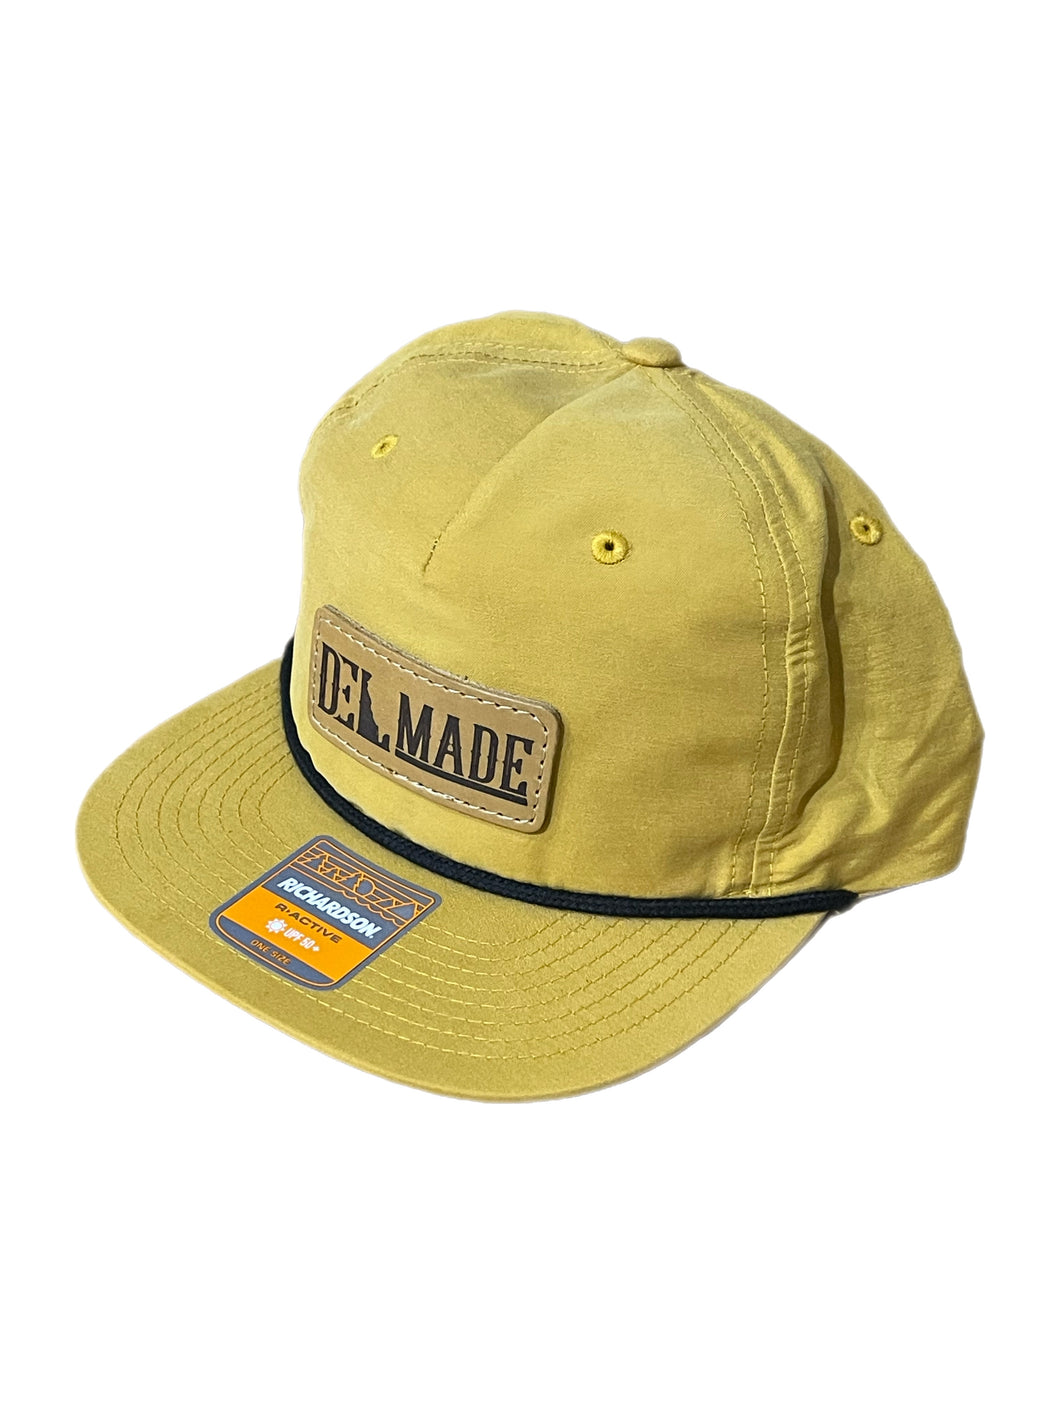 DEL Made Leather Patch Rope Hat